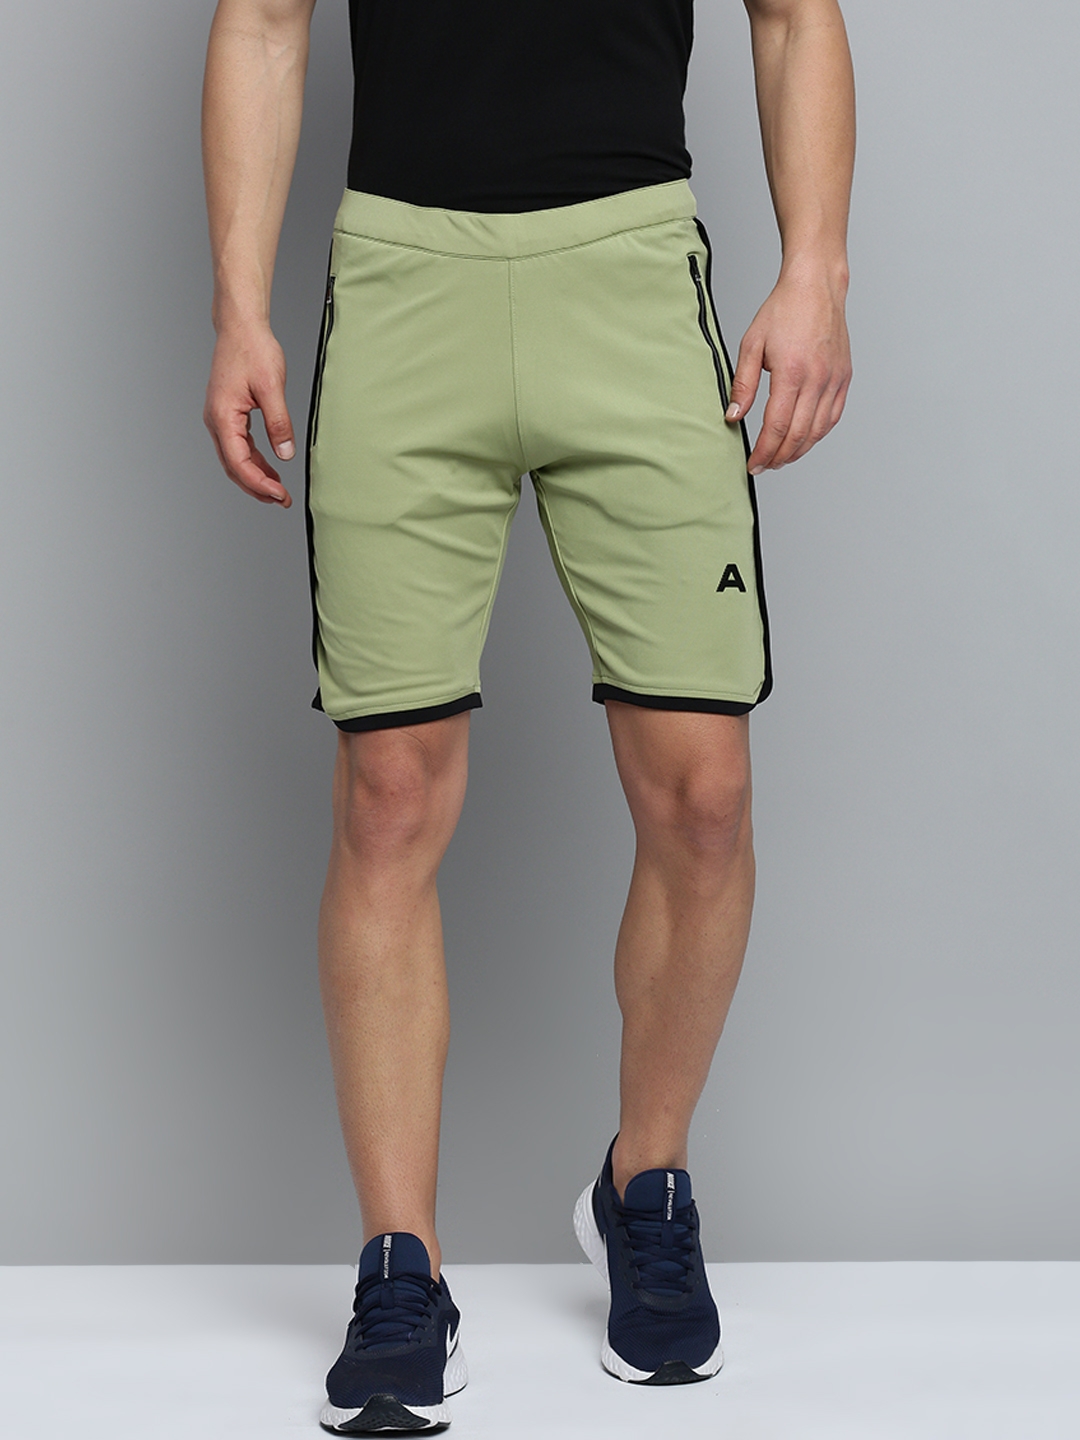 SHOWOFF Men's Knee Length Solid Green Mid-Rise Sports Shorts